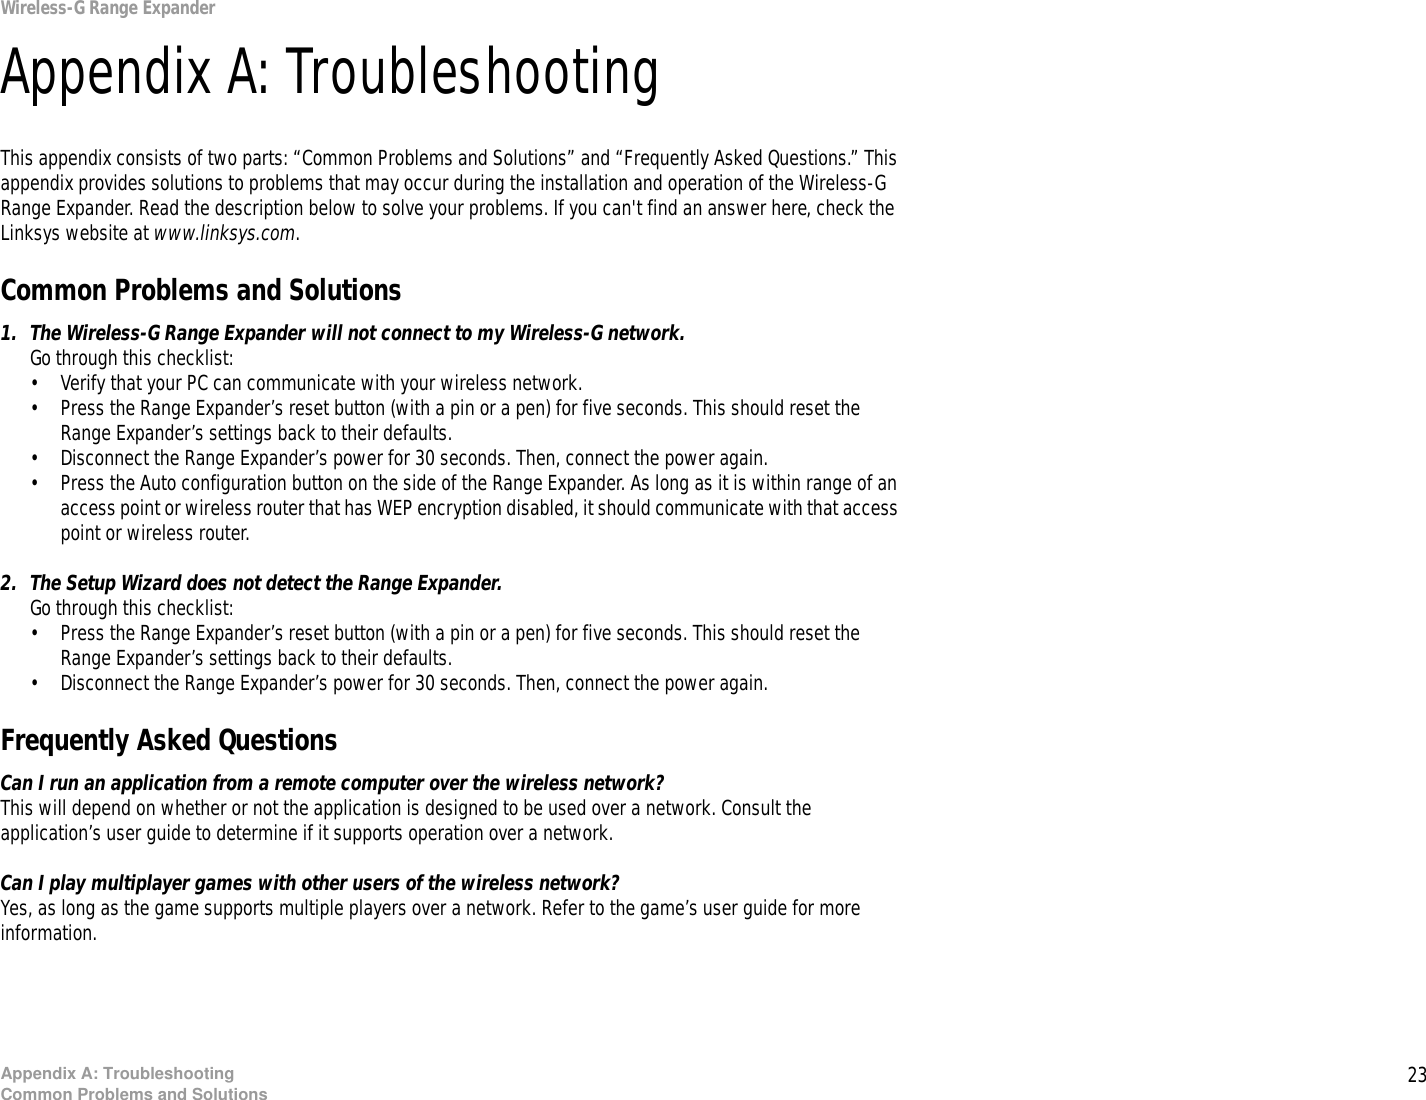 23Appendix A: TroubleshootingCommon Problems and SolutionsWireless-G Range ExpanderAppendix A: TroubleshootingThis appendix consists of two parts: “Common Problems and Solutions” and “Frequently Asked Questions.” This appendix provides solutions to problems that may occur during the installation and operation of the Wireless-G Range Expander. Read the description below to solve your problems. If you can&apos;t find an answer here, check the Linksys website at www.linksys.com.Common Problems and Solutions1. The Wireless-G Range Expander will not connect to my Wireless-G network.Go through this checklist:• Verify that your PC can communicate with your wireless network.• Press the Range Expander’s reset button (with a pin or a pen) for five seconds. This should reset the Range Expander’s settings back to their defaults.• Disconnect the Range Expander’s power for 30 seconds. Then, connect the power again.• Press the Auto configuration button on the side of the Range Expander. As long as it is within range of an access point or wireless router that has WEP encryption disabled, it should communicate with that access point or wireless router.2. The Setup Wizard does not detect the Range Expander.Go through this checklist:• Press the Range Expander’s reset button (with a pin or a pen) for five seconds. This should reset the Range Expander’s settings back to their defaults.• Disconnect the Range Expander’s power for 30 seconds. Then, connect the power again.Frequently Asked QuestionsCan I run an application from a remote computer over the wireless network?This will depend on whether or not the application is designed to be used over a network. Consult the application’s user guide to determine if it supports operation over a network.Can I play multiplayer games with other users of the wireless network?Yes, as long as the game supports multiple players over a network. Refer to the game’s user guide for more information. 